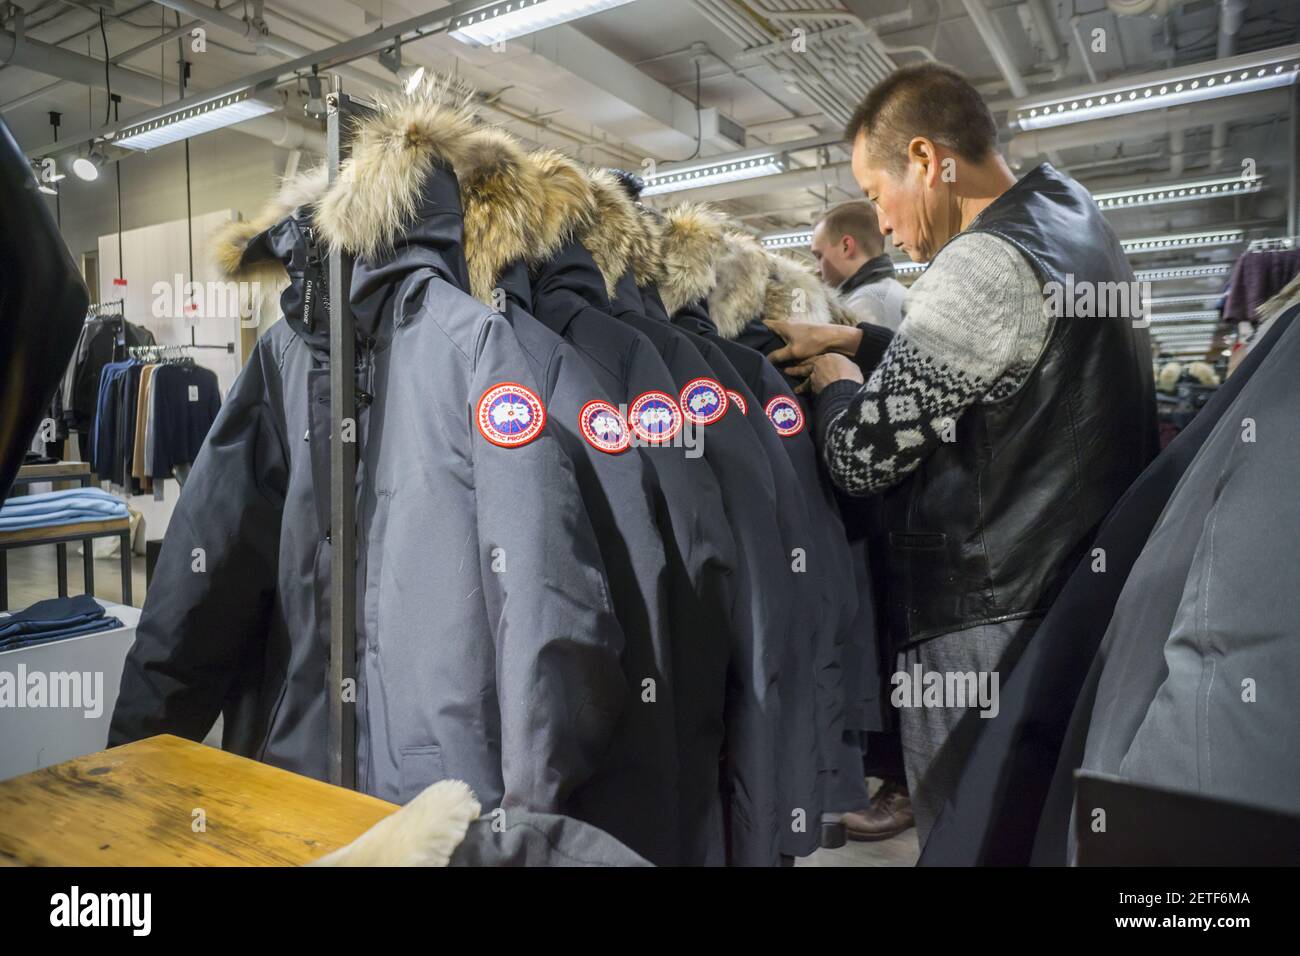 Canada Goose brand parkas in a store in New York on Saturday, January 14,  2017. Canada Goose (GOOS) has filed for an IPO in Toronto and New York with  a $100 million